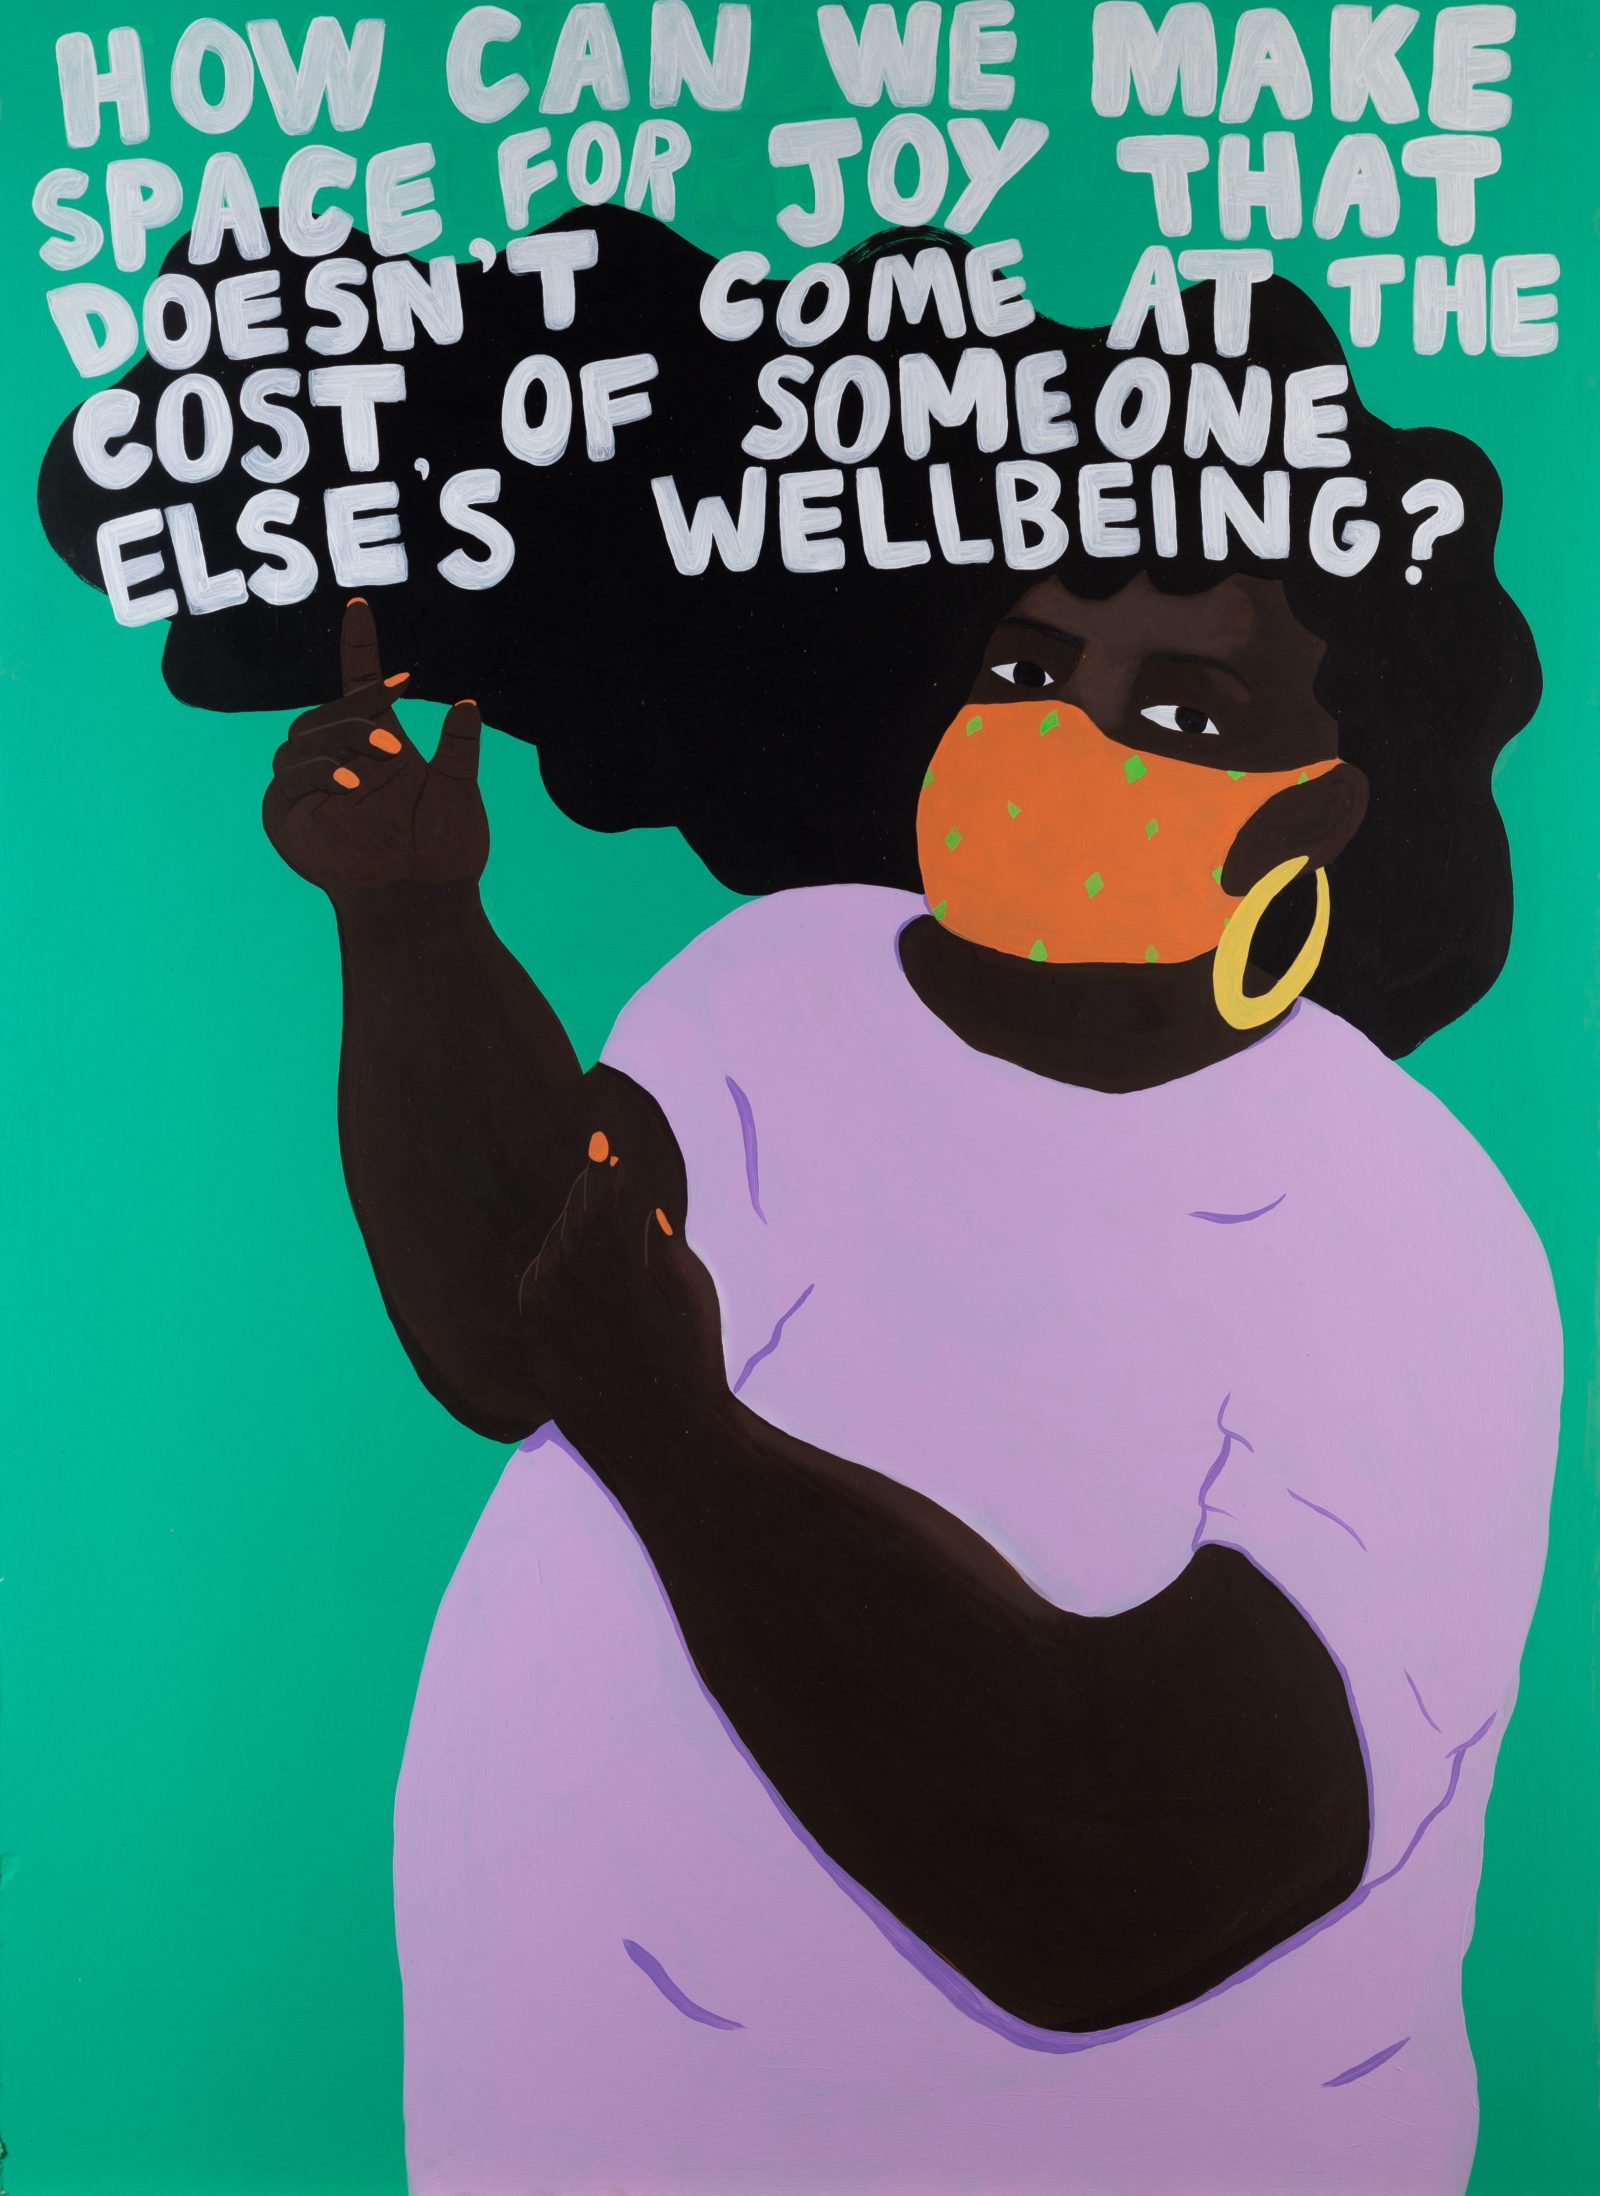 A dark skinned Black person is standing in front of a green background. They are wearing a lilac t-shirt , they have an orange face mask which matches their orange painted nails. The wear gold hoop earrings and their long black hair is flowing behind them in the air. Their arms are painted up in the air towards text which says 'How can we make space for joy that doesn't come at the cost of someone else's wellbeing?'